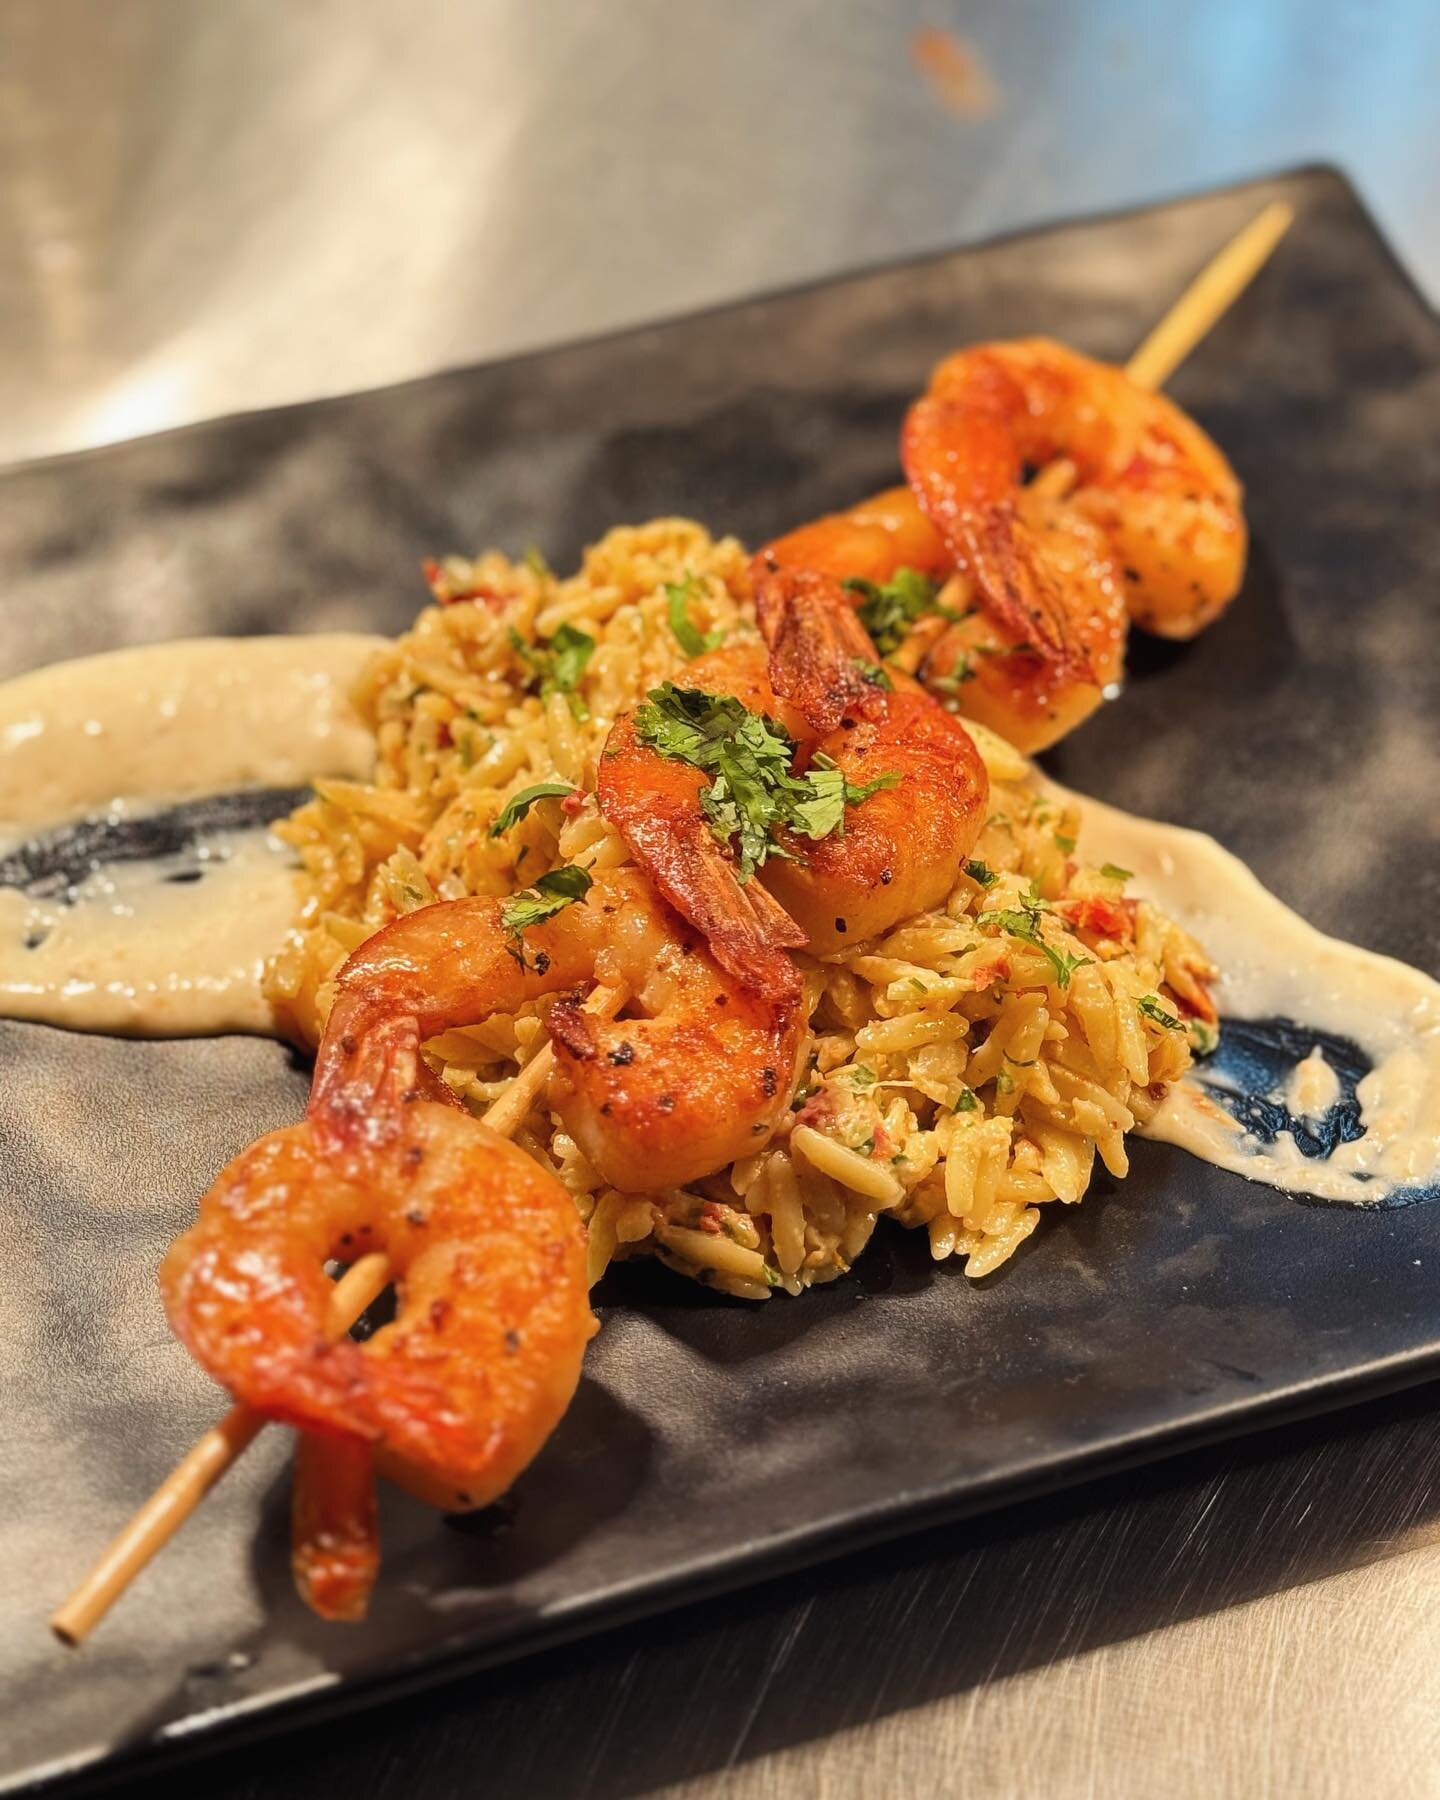 Friday Feature: Smoked Shrimp skewer with Mediterranean orzo!